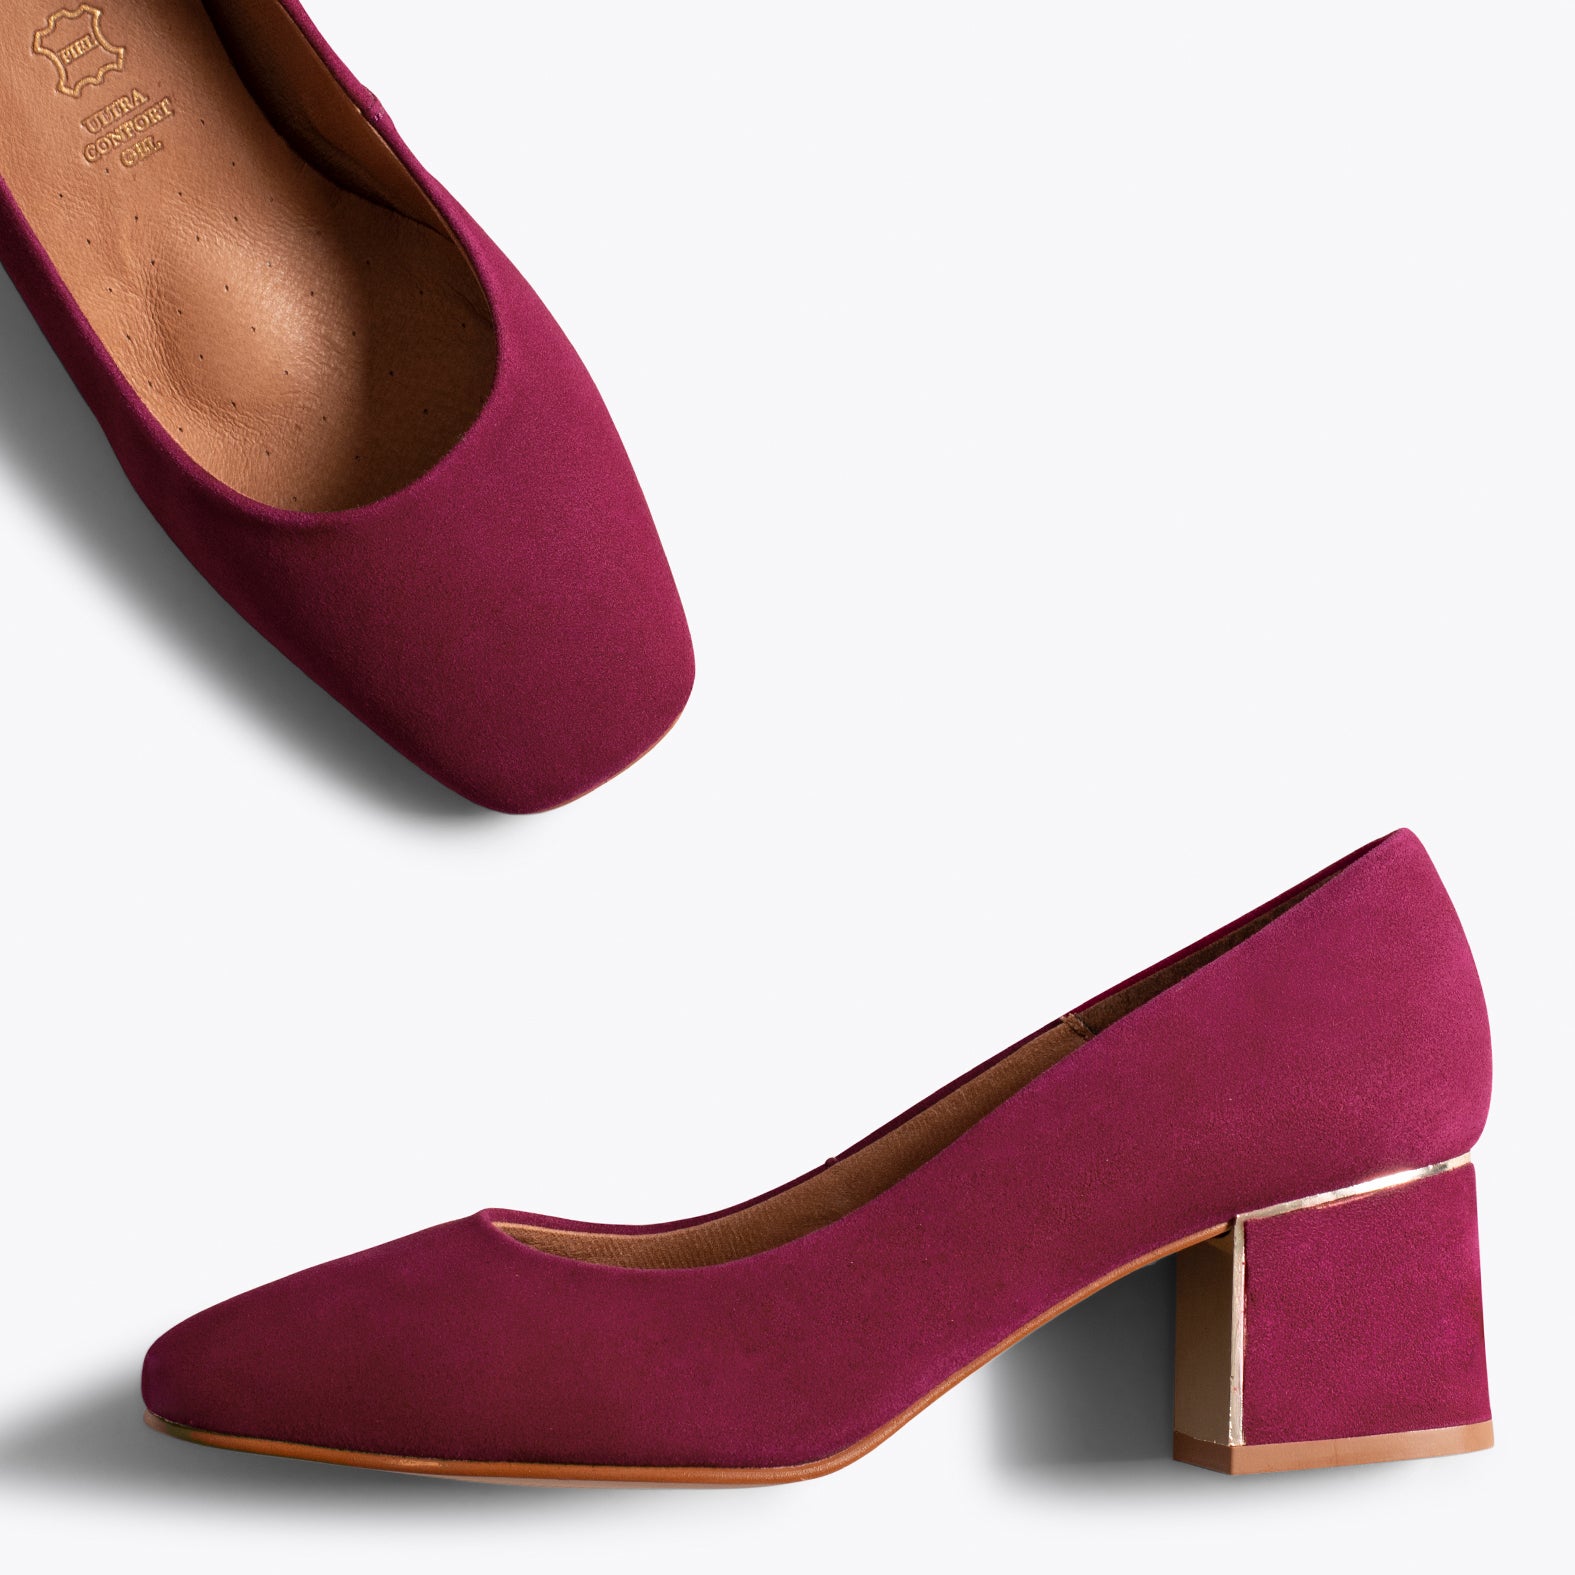 FEMME – WINE mid heeled shoes with square toe